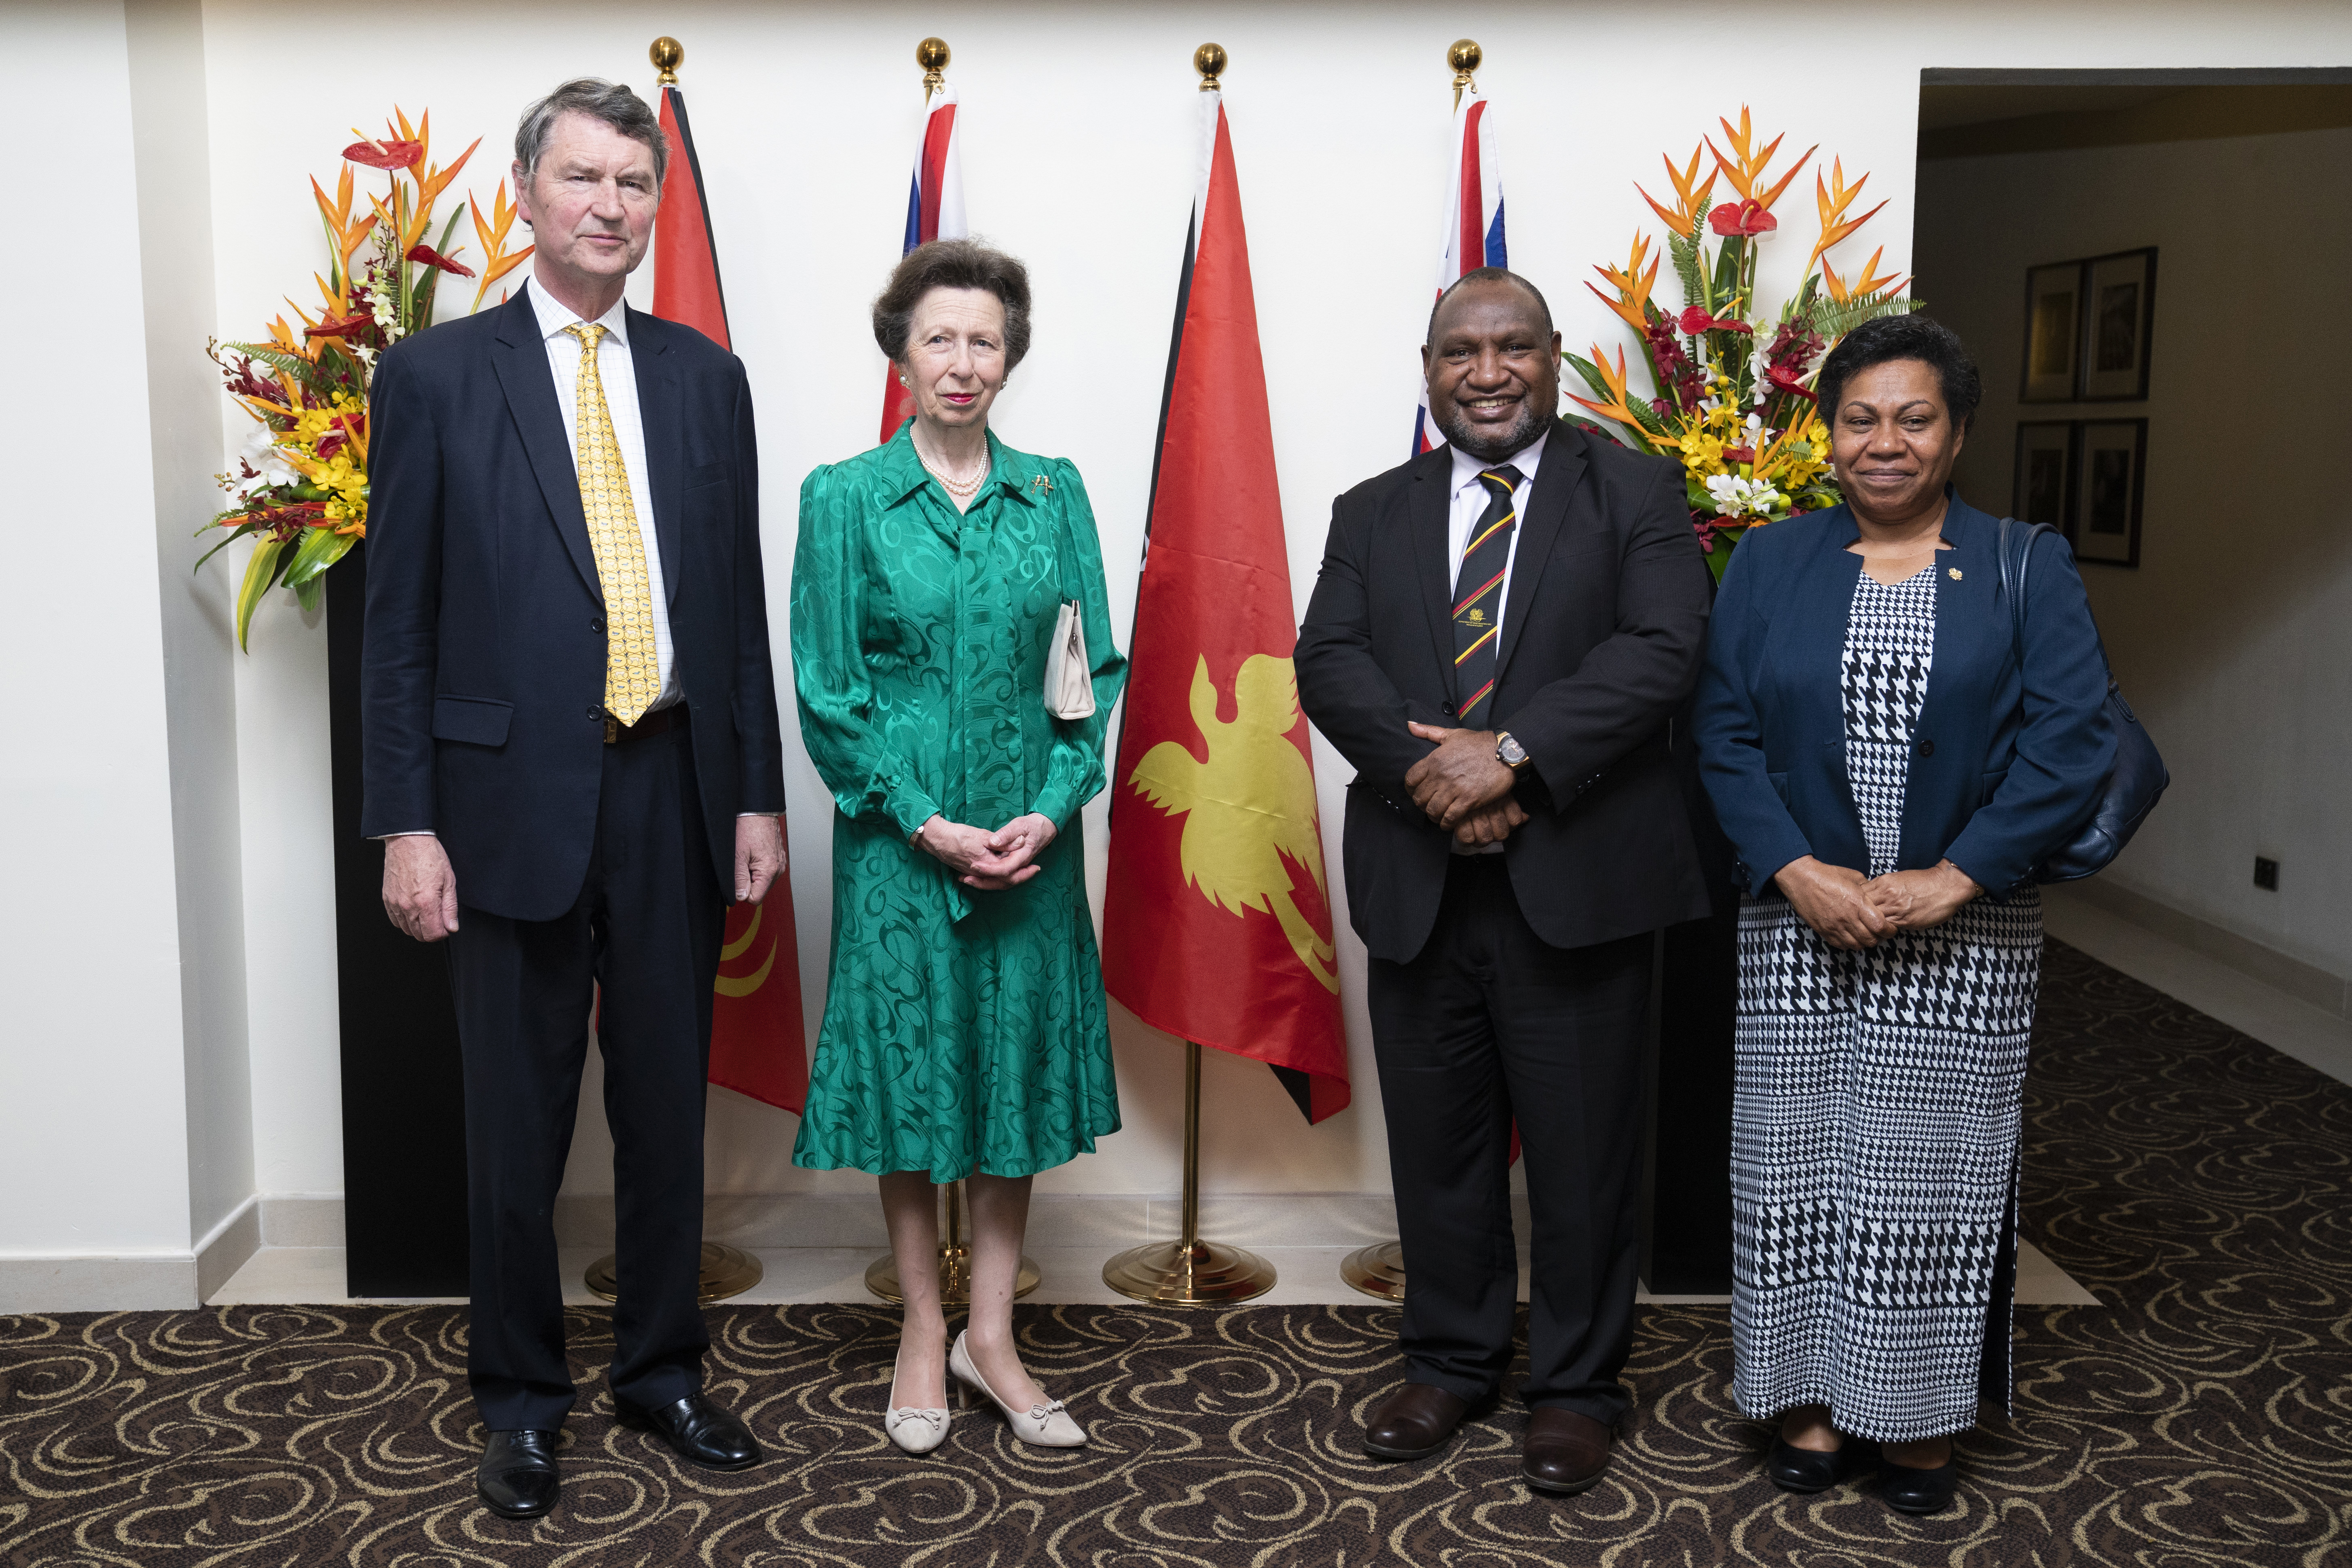 The Princess Royal and Vice Admiral Sir Tim Laurence are welcomed to Papua New Guinea